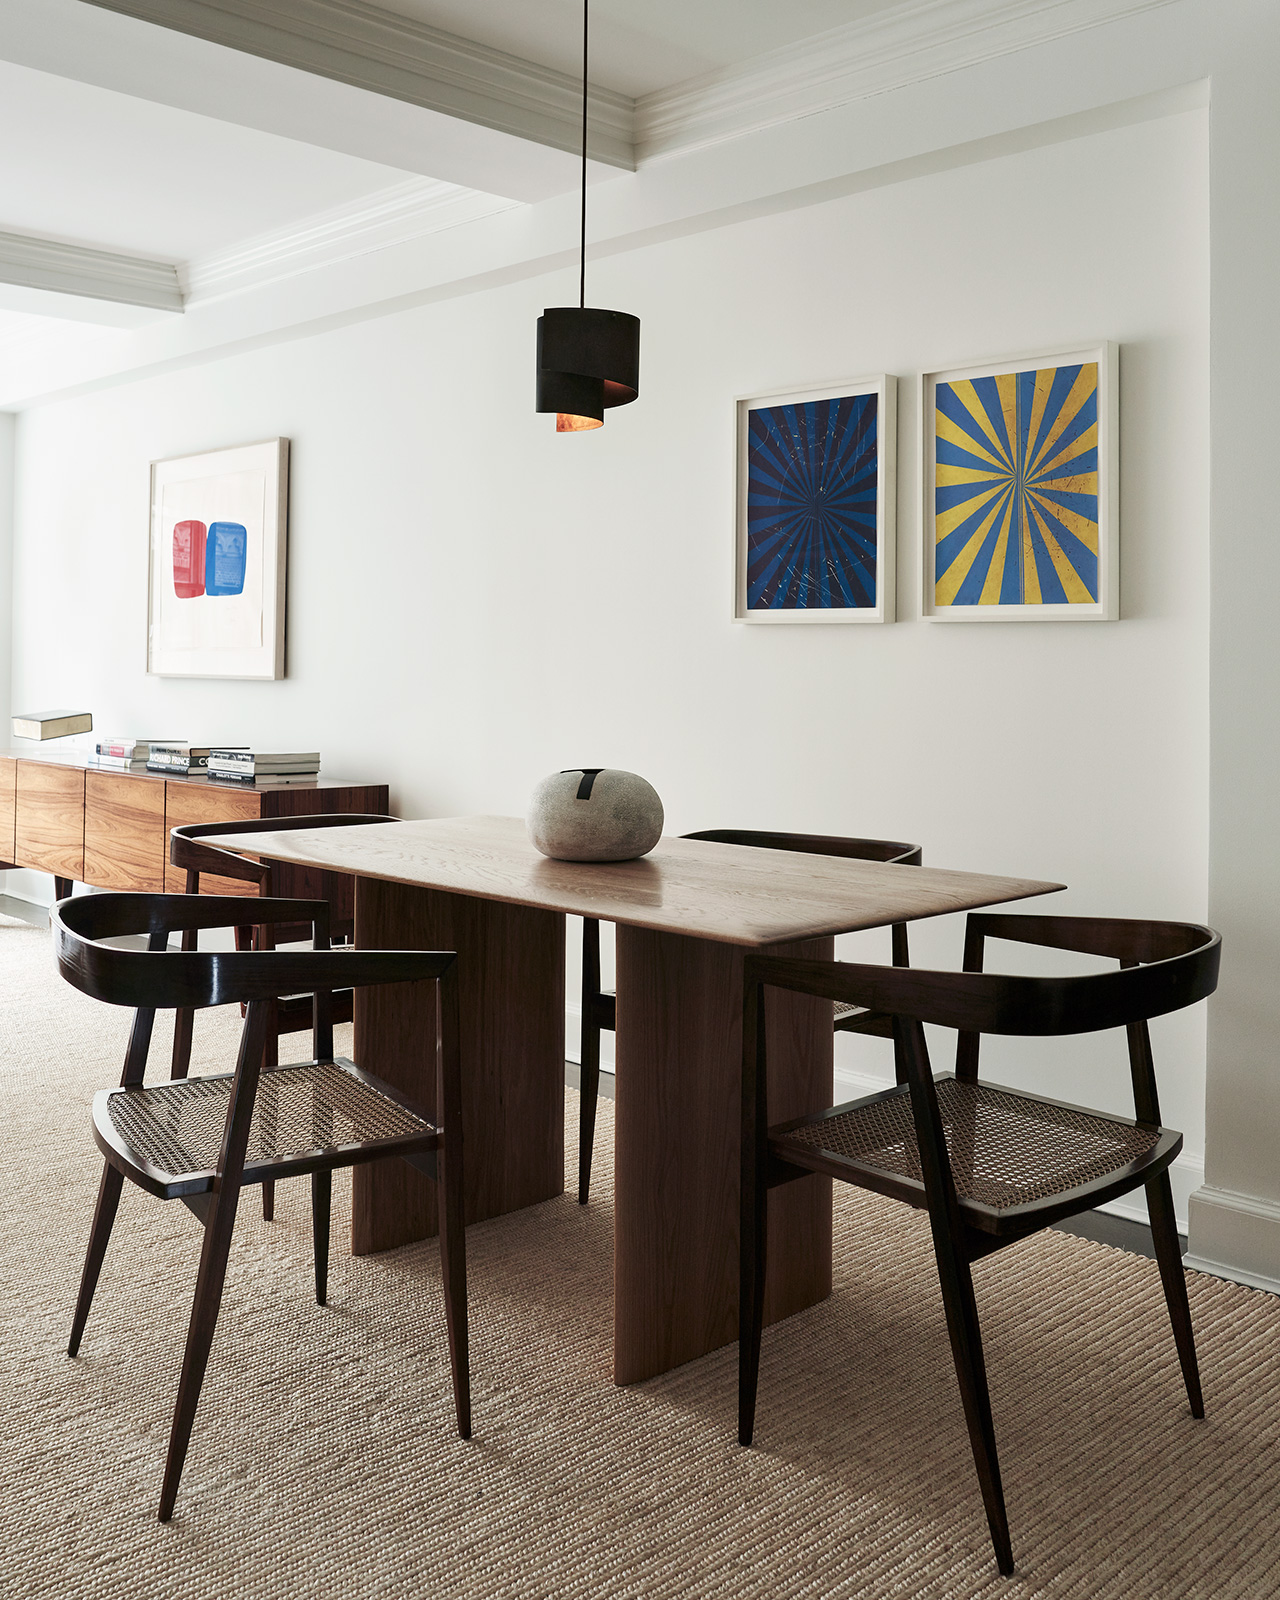 Photography by Adrian Gaut. Styling by Colin King.
Featured: Bespoke dining table by Sandra Weingort fabricated by Casey Johnson Studio; Dining chairs by Joaquim Tenreiro circa 1960 from Bossa Furniture; Pendant lamp by Jørn Utzon circa 1960 from Galerie Half; Artwork (Diptych) by Mark Grotjahn from Anton Kern Gallery.